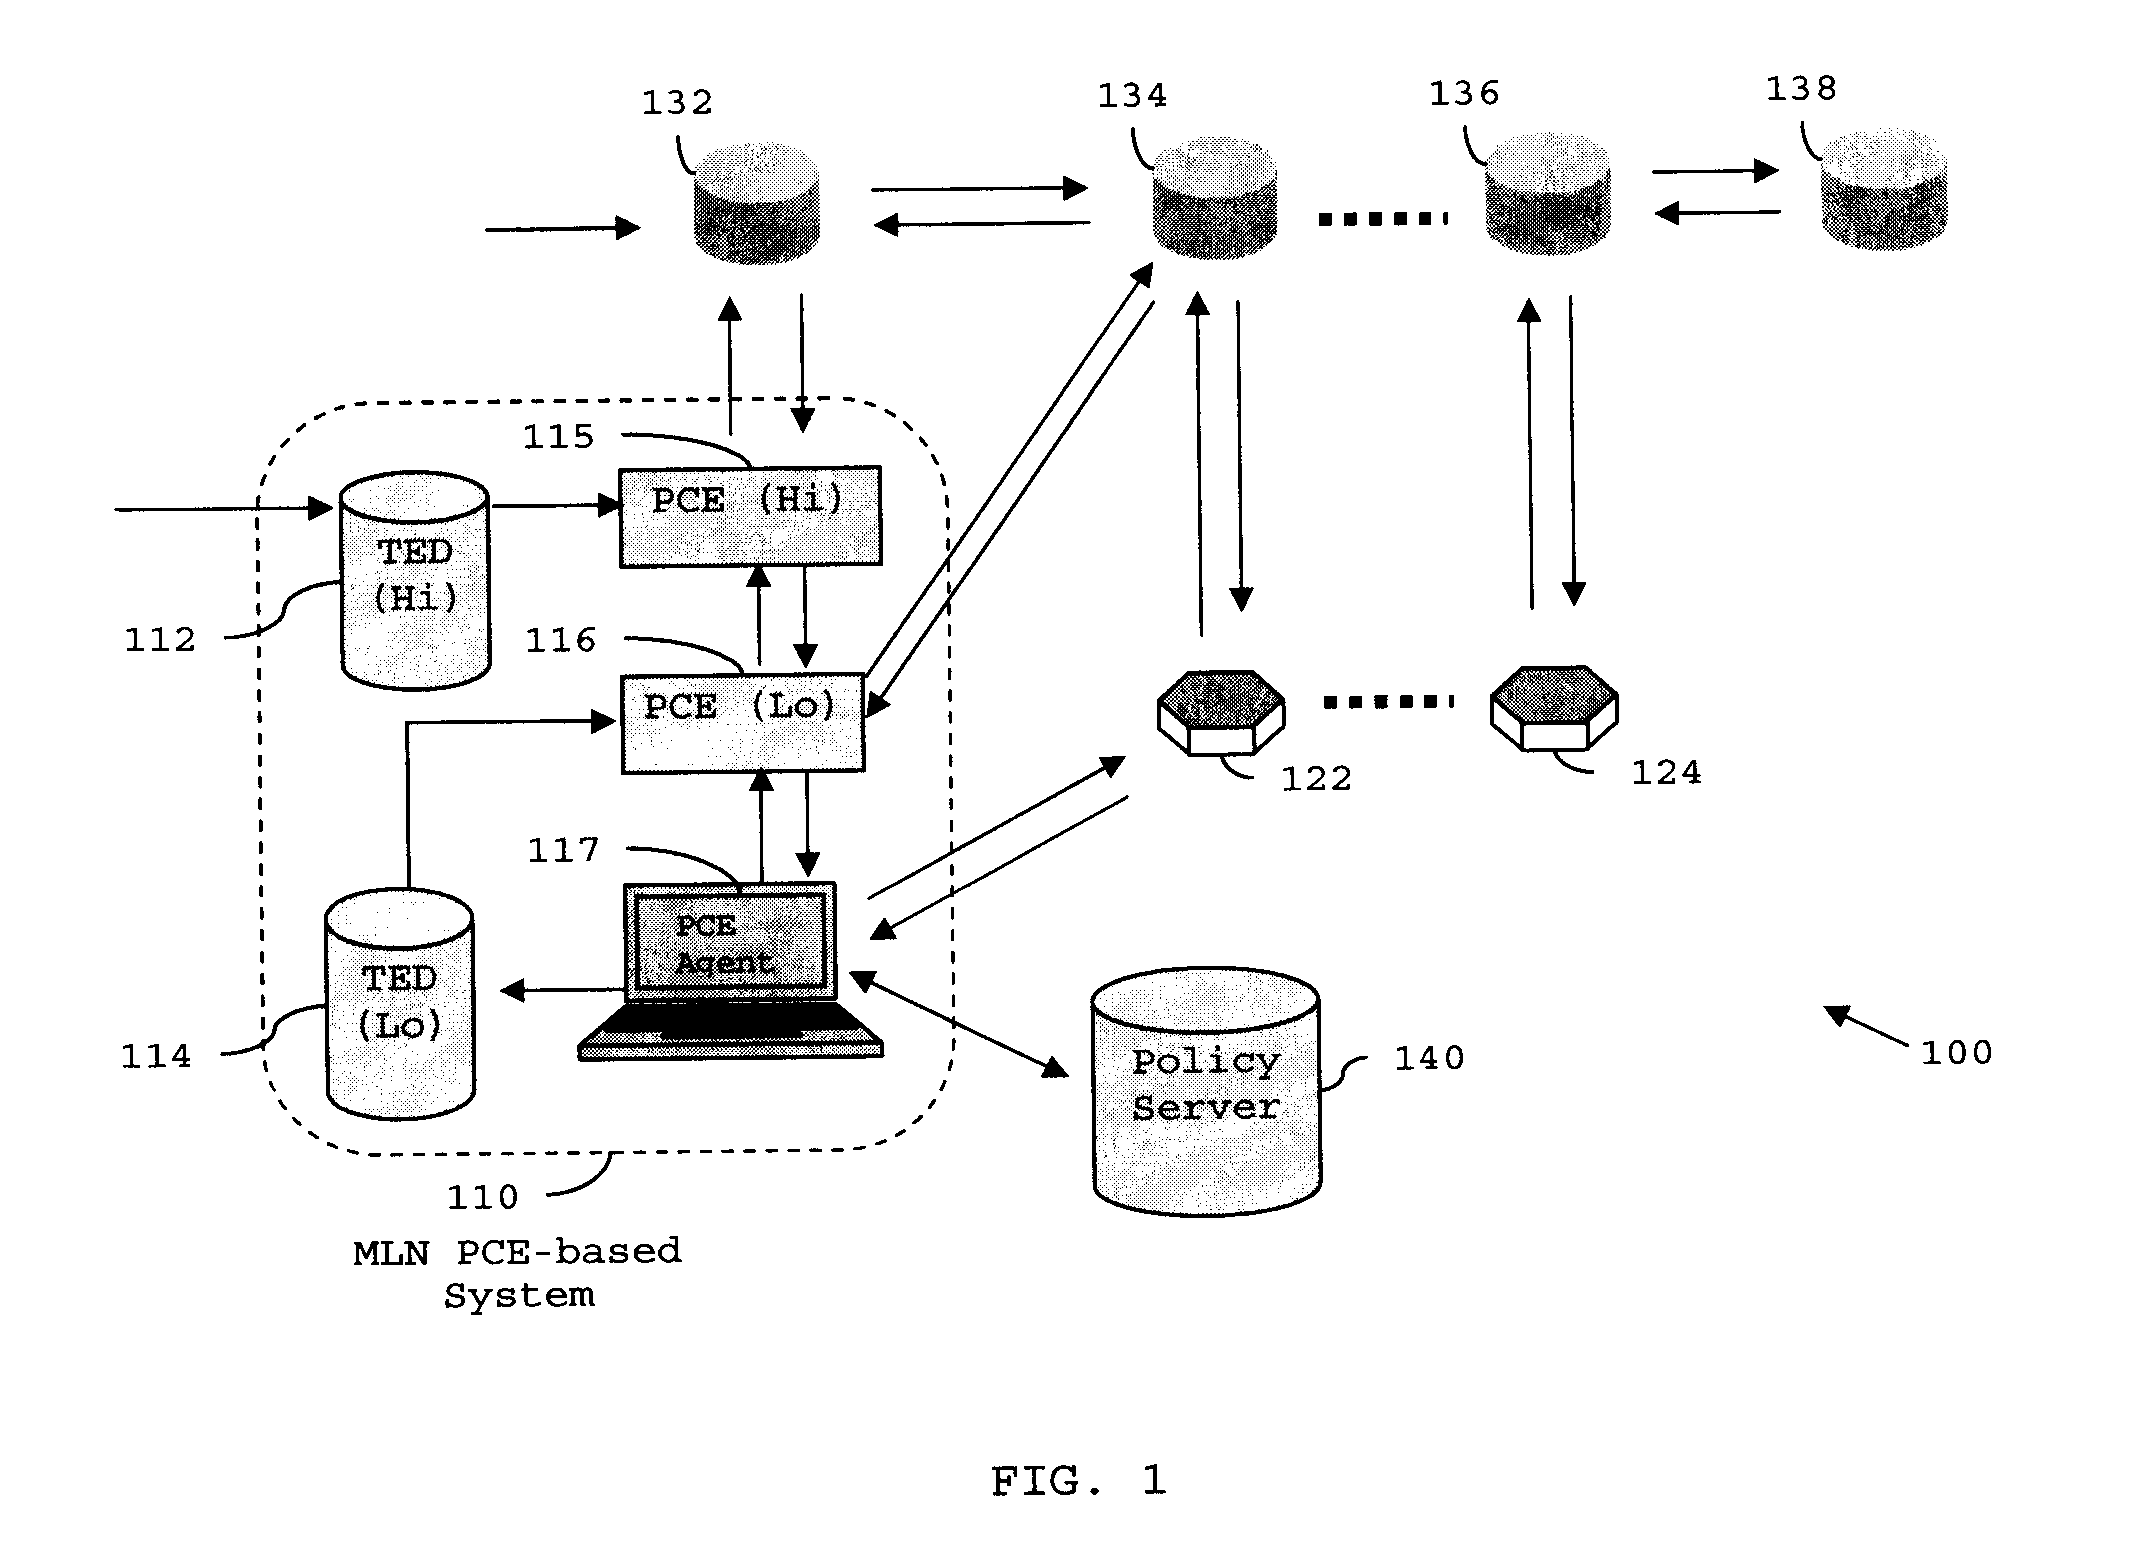 Distributed PCE-based system and architecture in multi-layer network